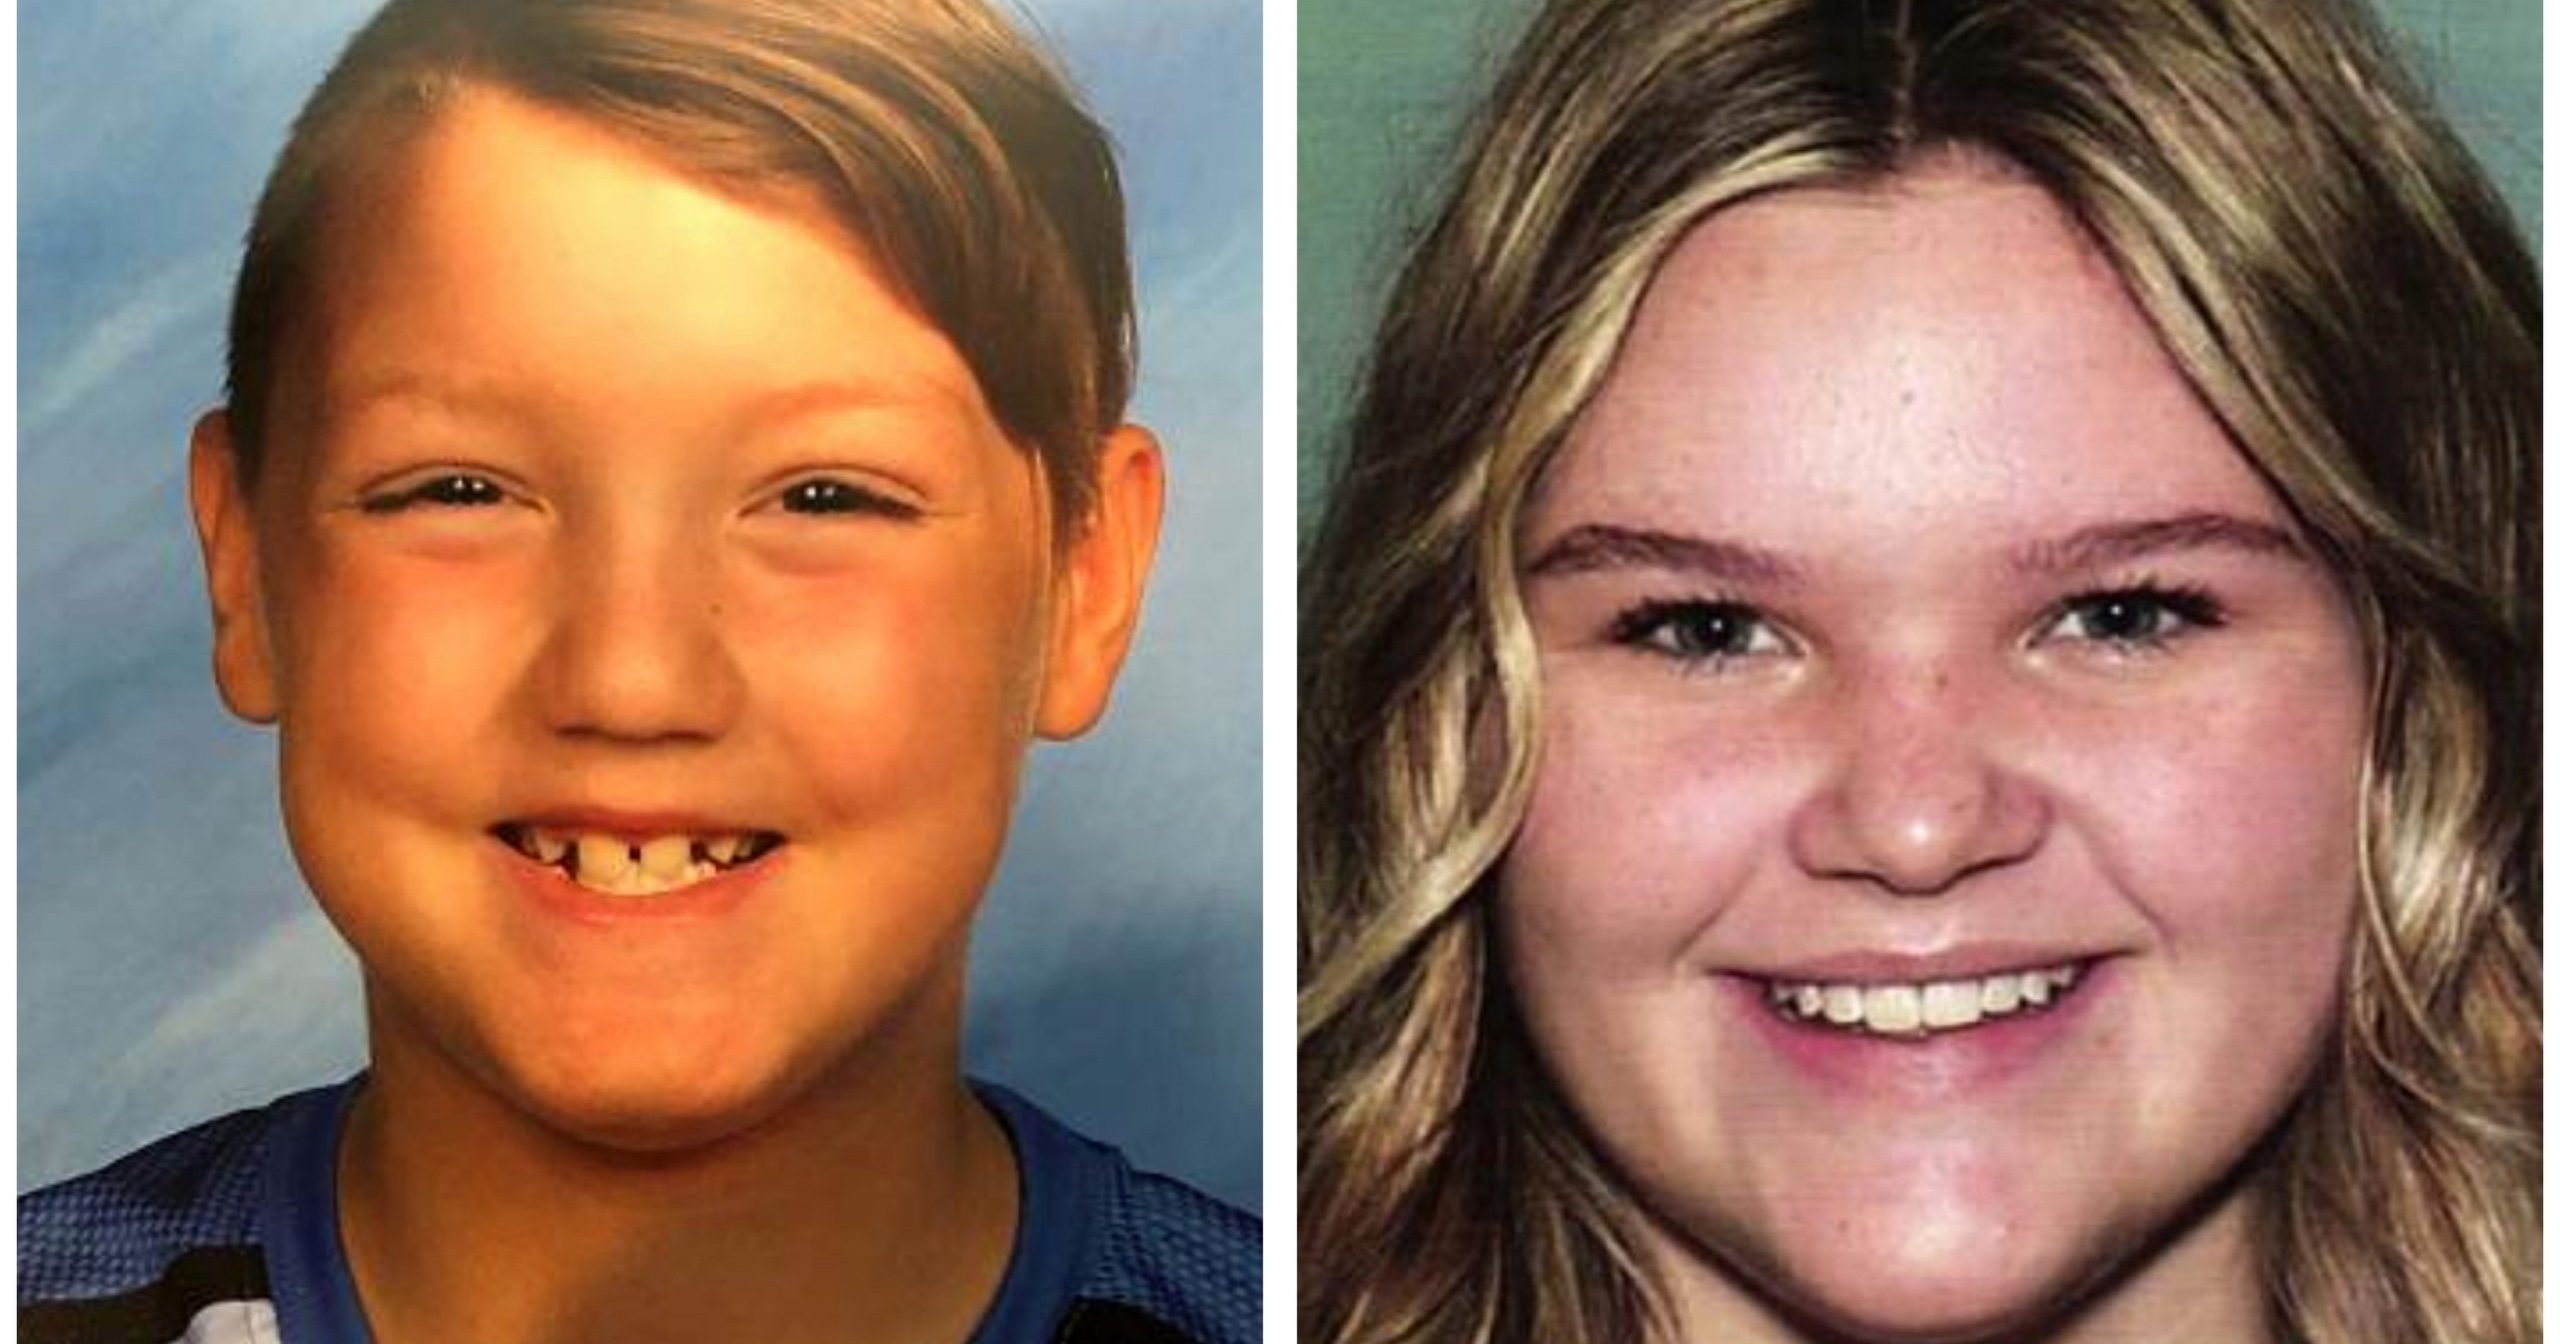 This combination of undated file photos released by the National Center for Missing & Exploited Children shows missing children Joshua "JJ" Vallow, left, and Tylee Ryan. Seven-year-old Joshua and Ryan, 17, haven't been seen since September, and police say both Chad and Lori Daybell lied to investigators about the children's whereabouts.